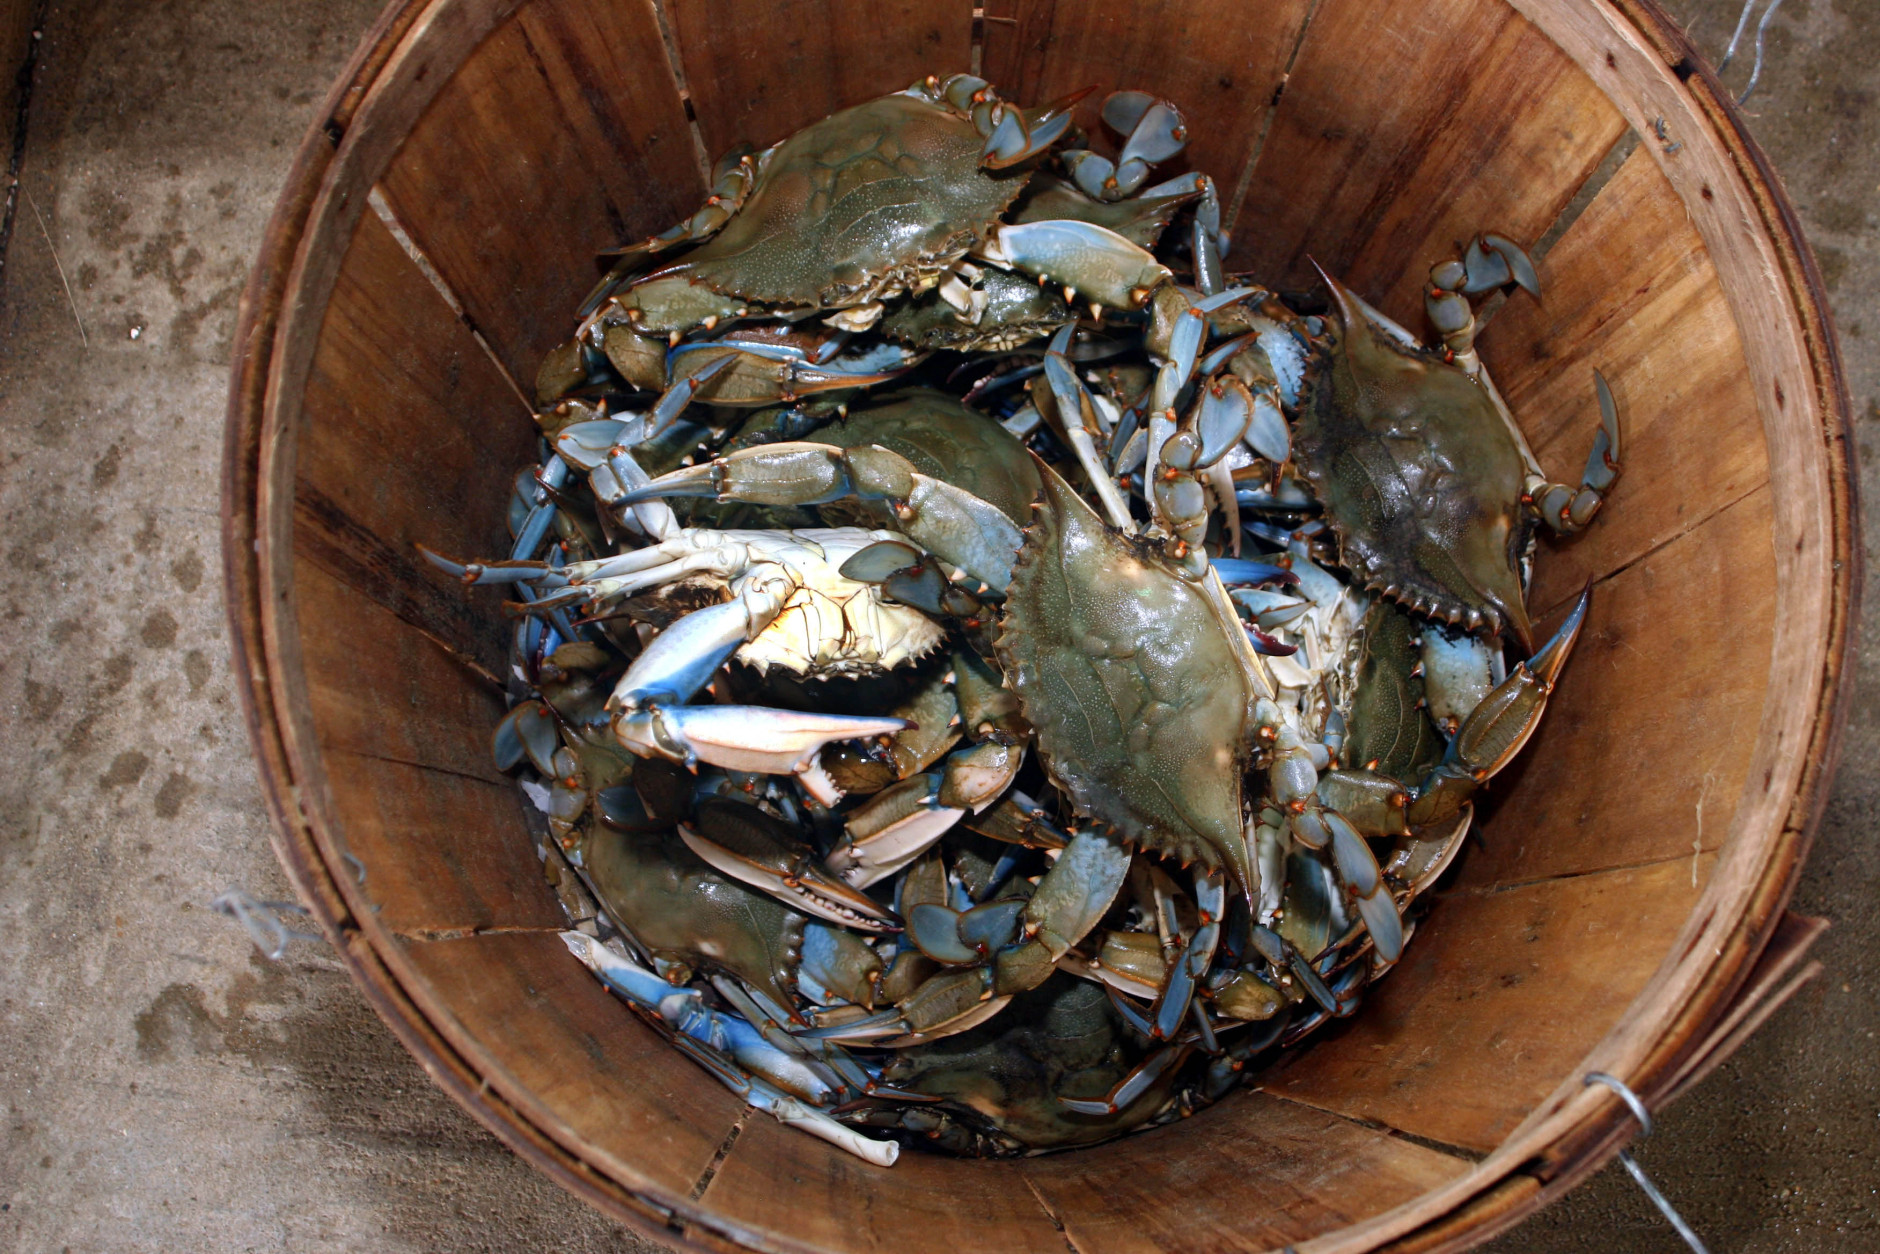 ** ADVANCE FOR SUNDAY JULY 2 **Live male and female blue crabs are shown at J.M. Clayton Co. in Cambridge, Md., Wednesday June 28, 2006. Crab processors say it's an easy decision, either hire Mexican workers to pick crabs or close up shop. The only thing they're unsure of is whether they'll be allowed to hire employees next year on seasonal work visas. (AP Photo/Kathleen Lange)